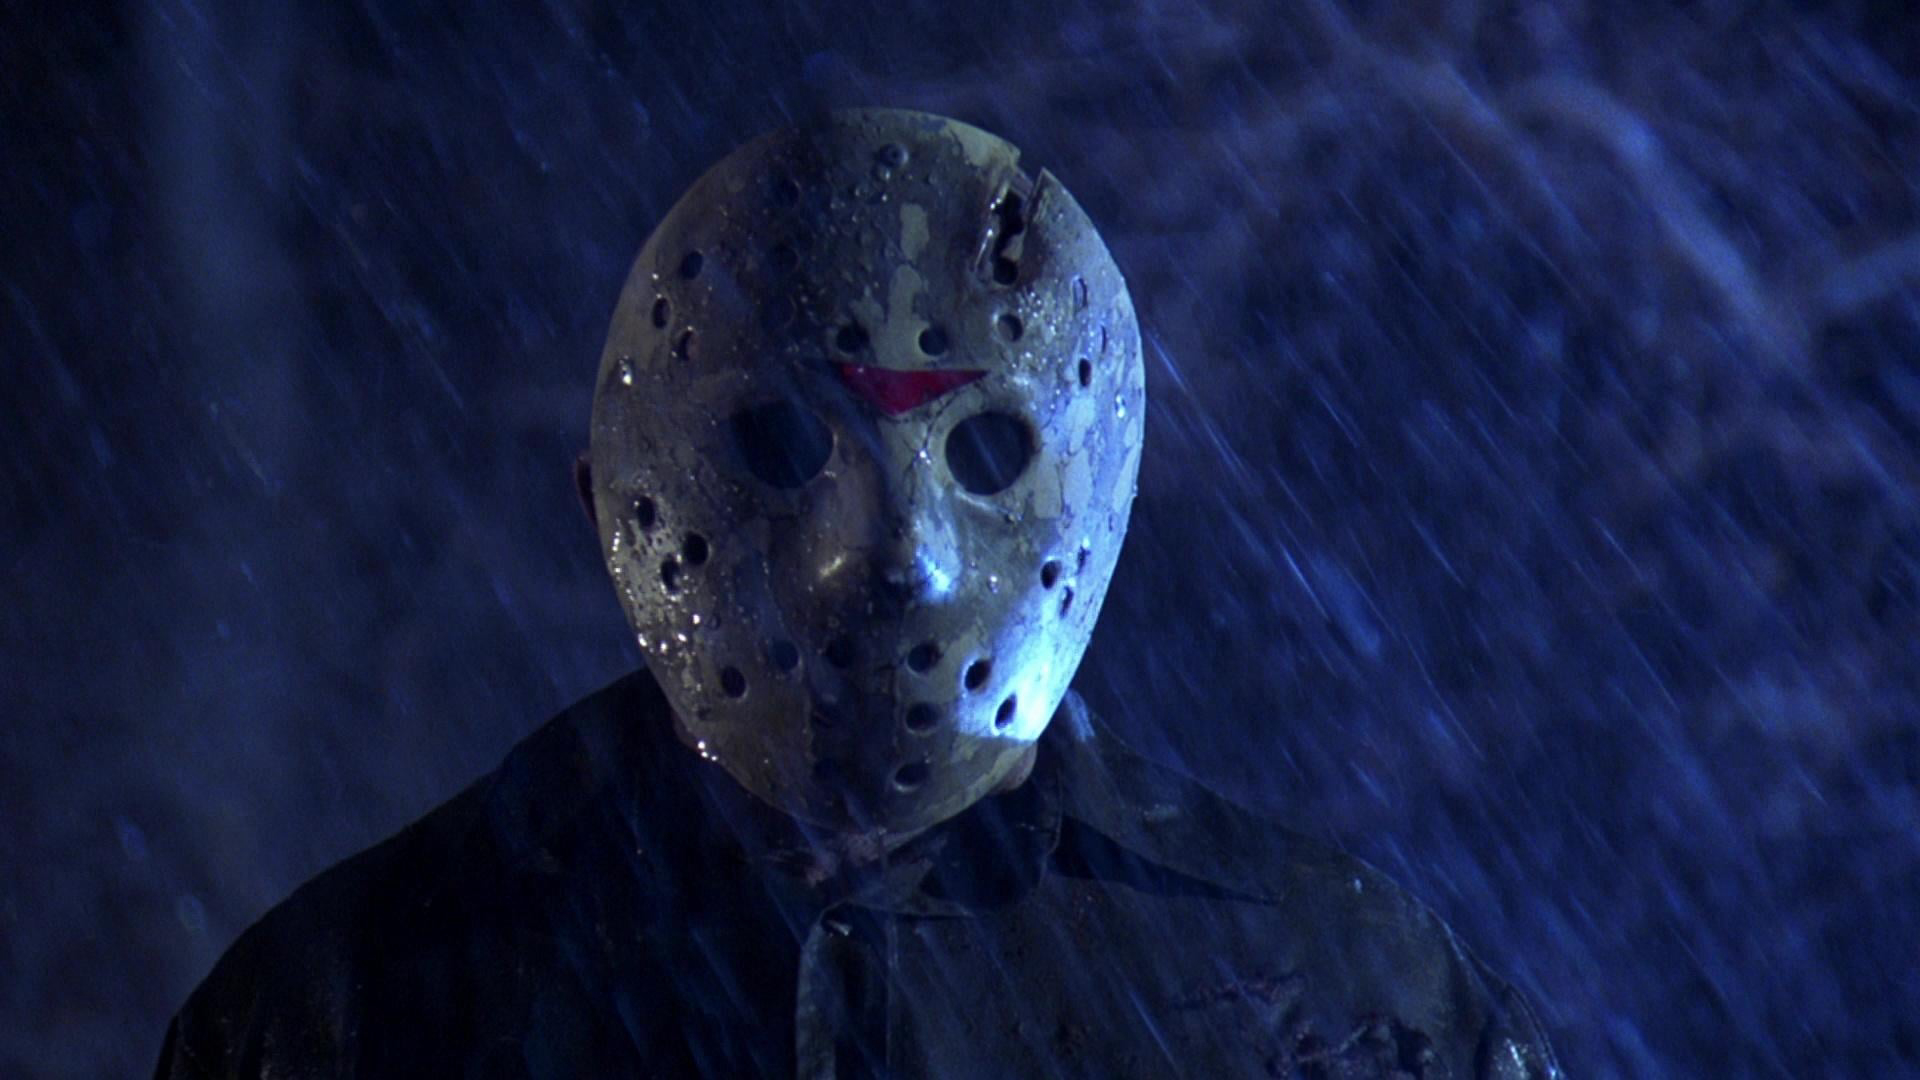 Friday the 13th: A New Beginning / Friday the 13th: A New Beginning (1985)